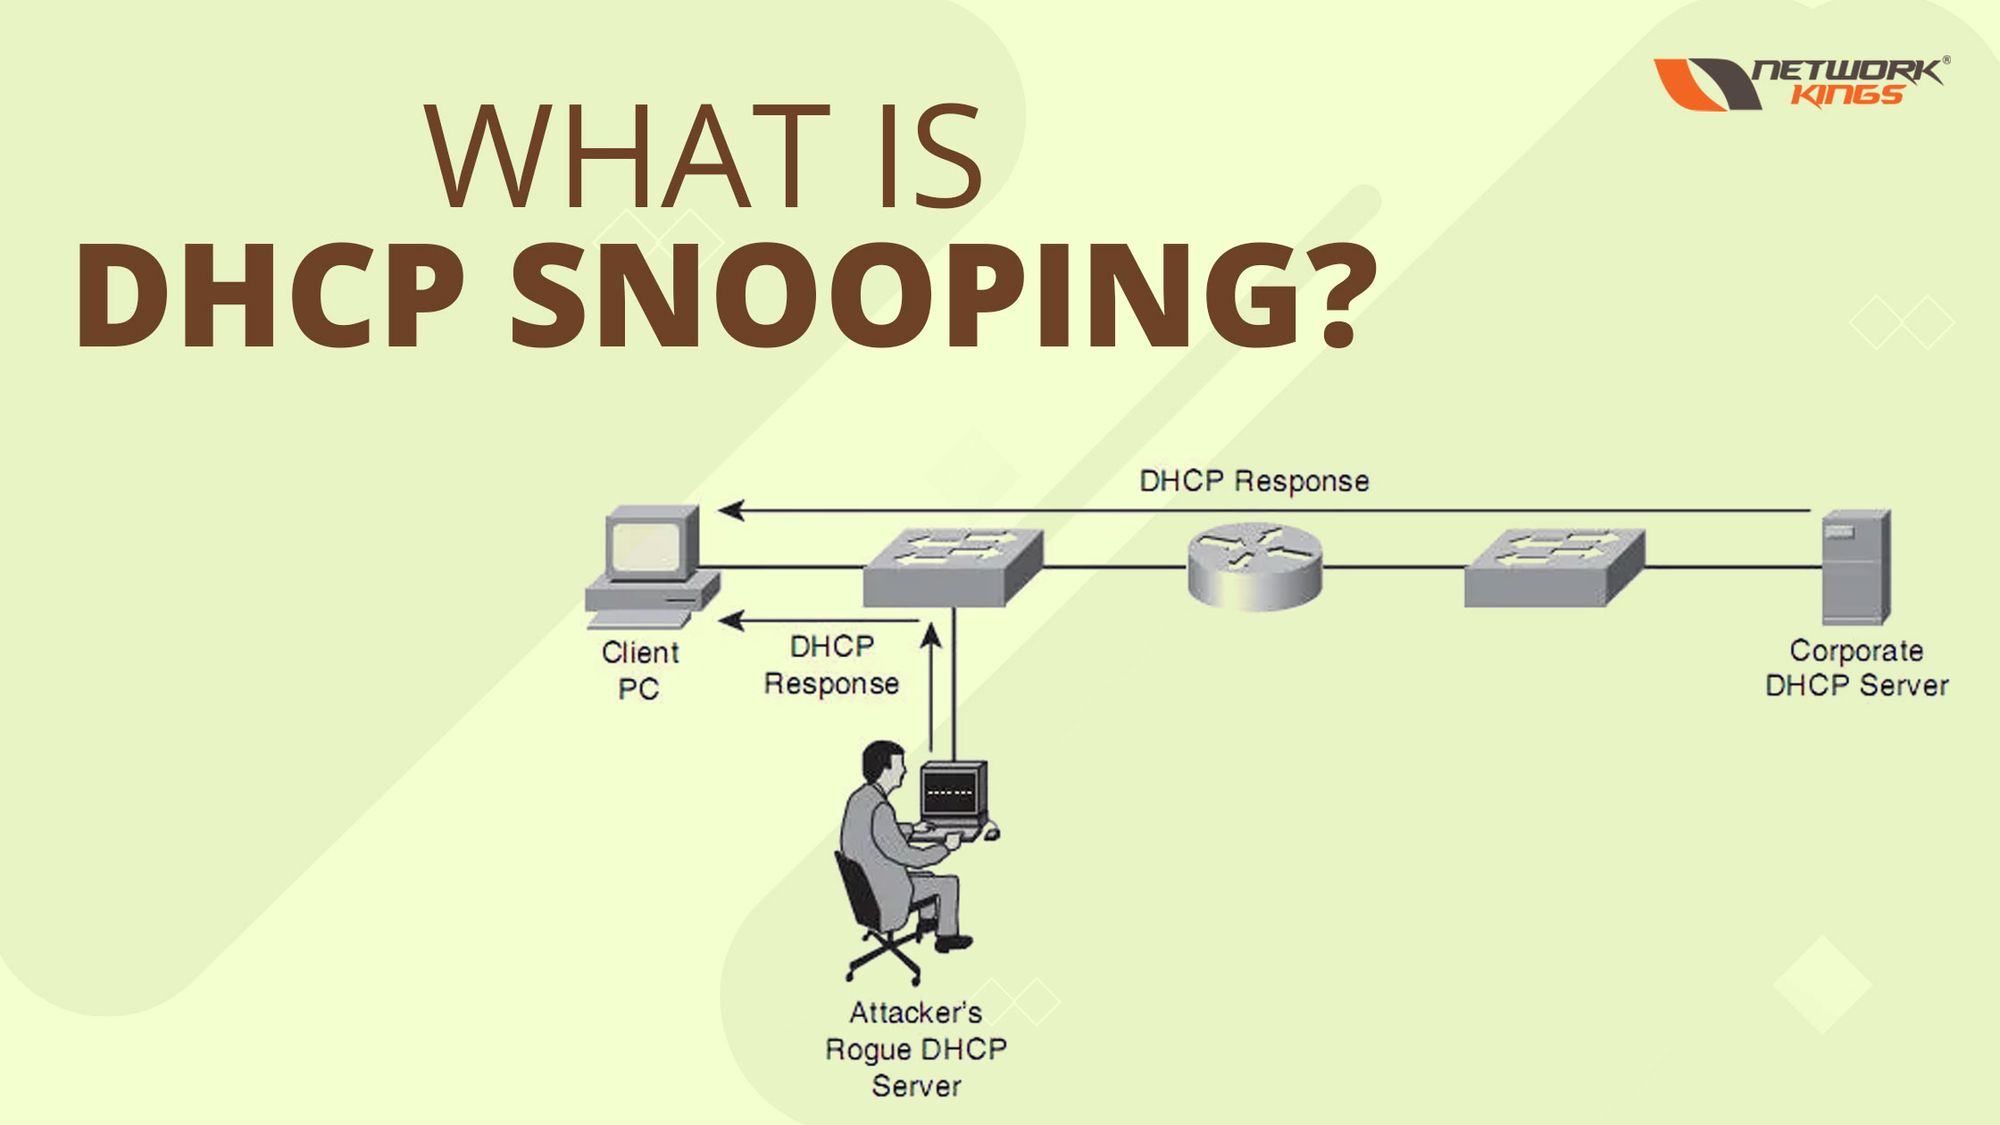 What is DHCP Snooping?